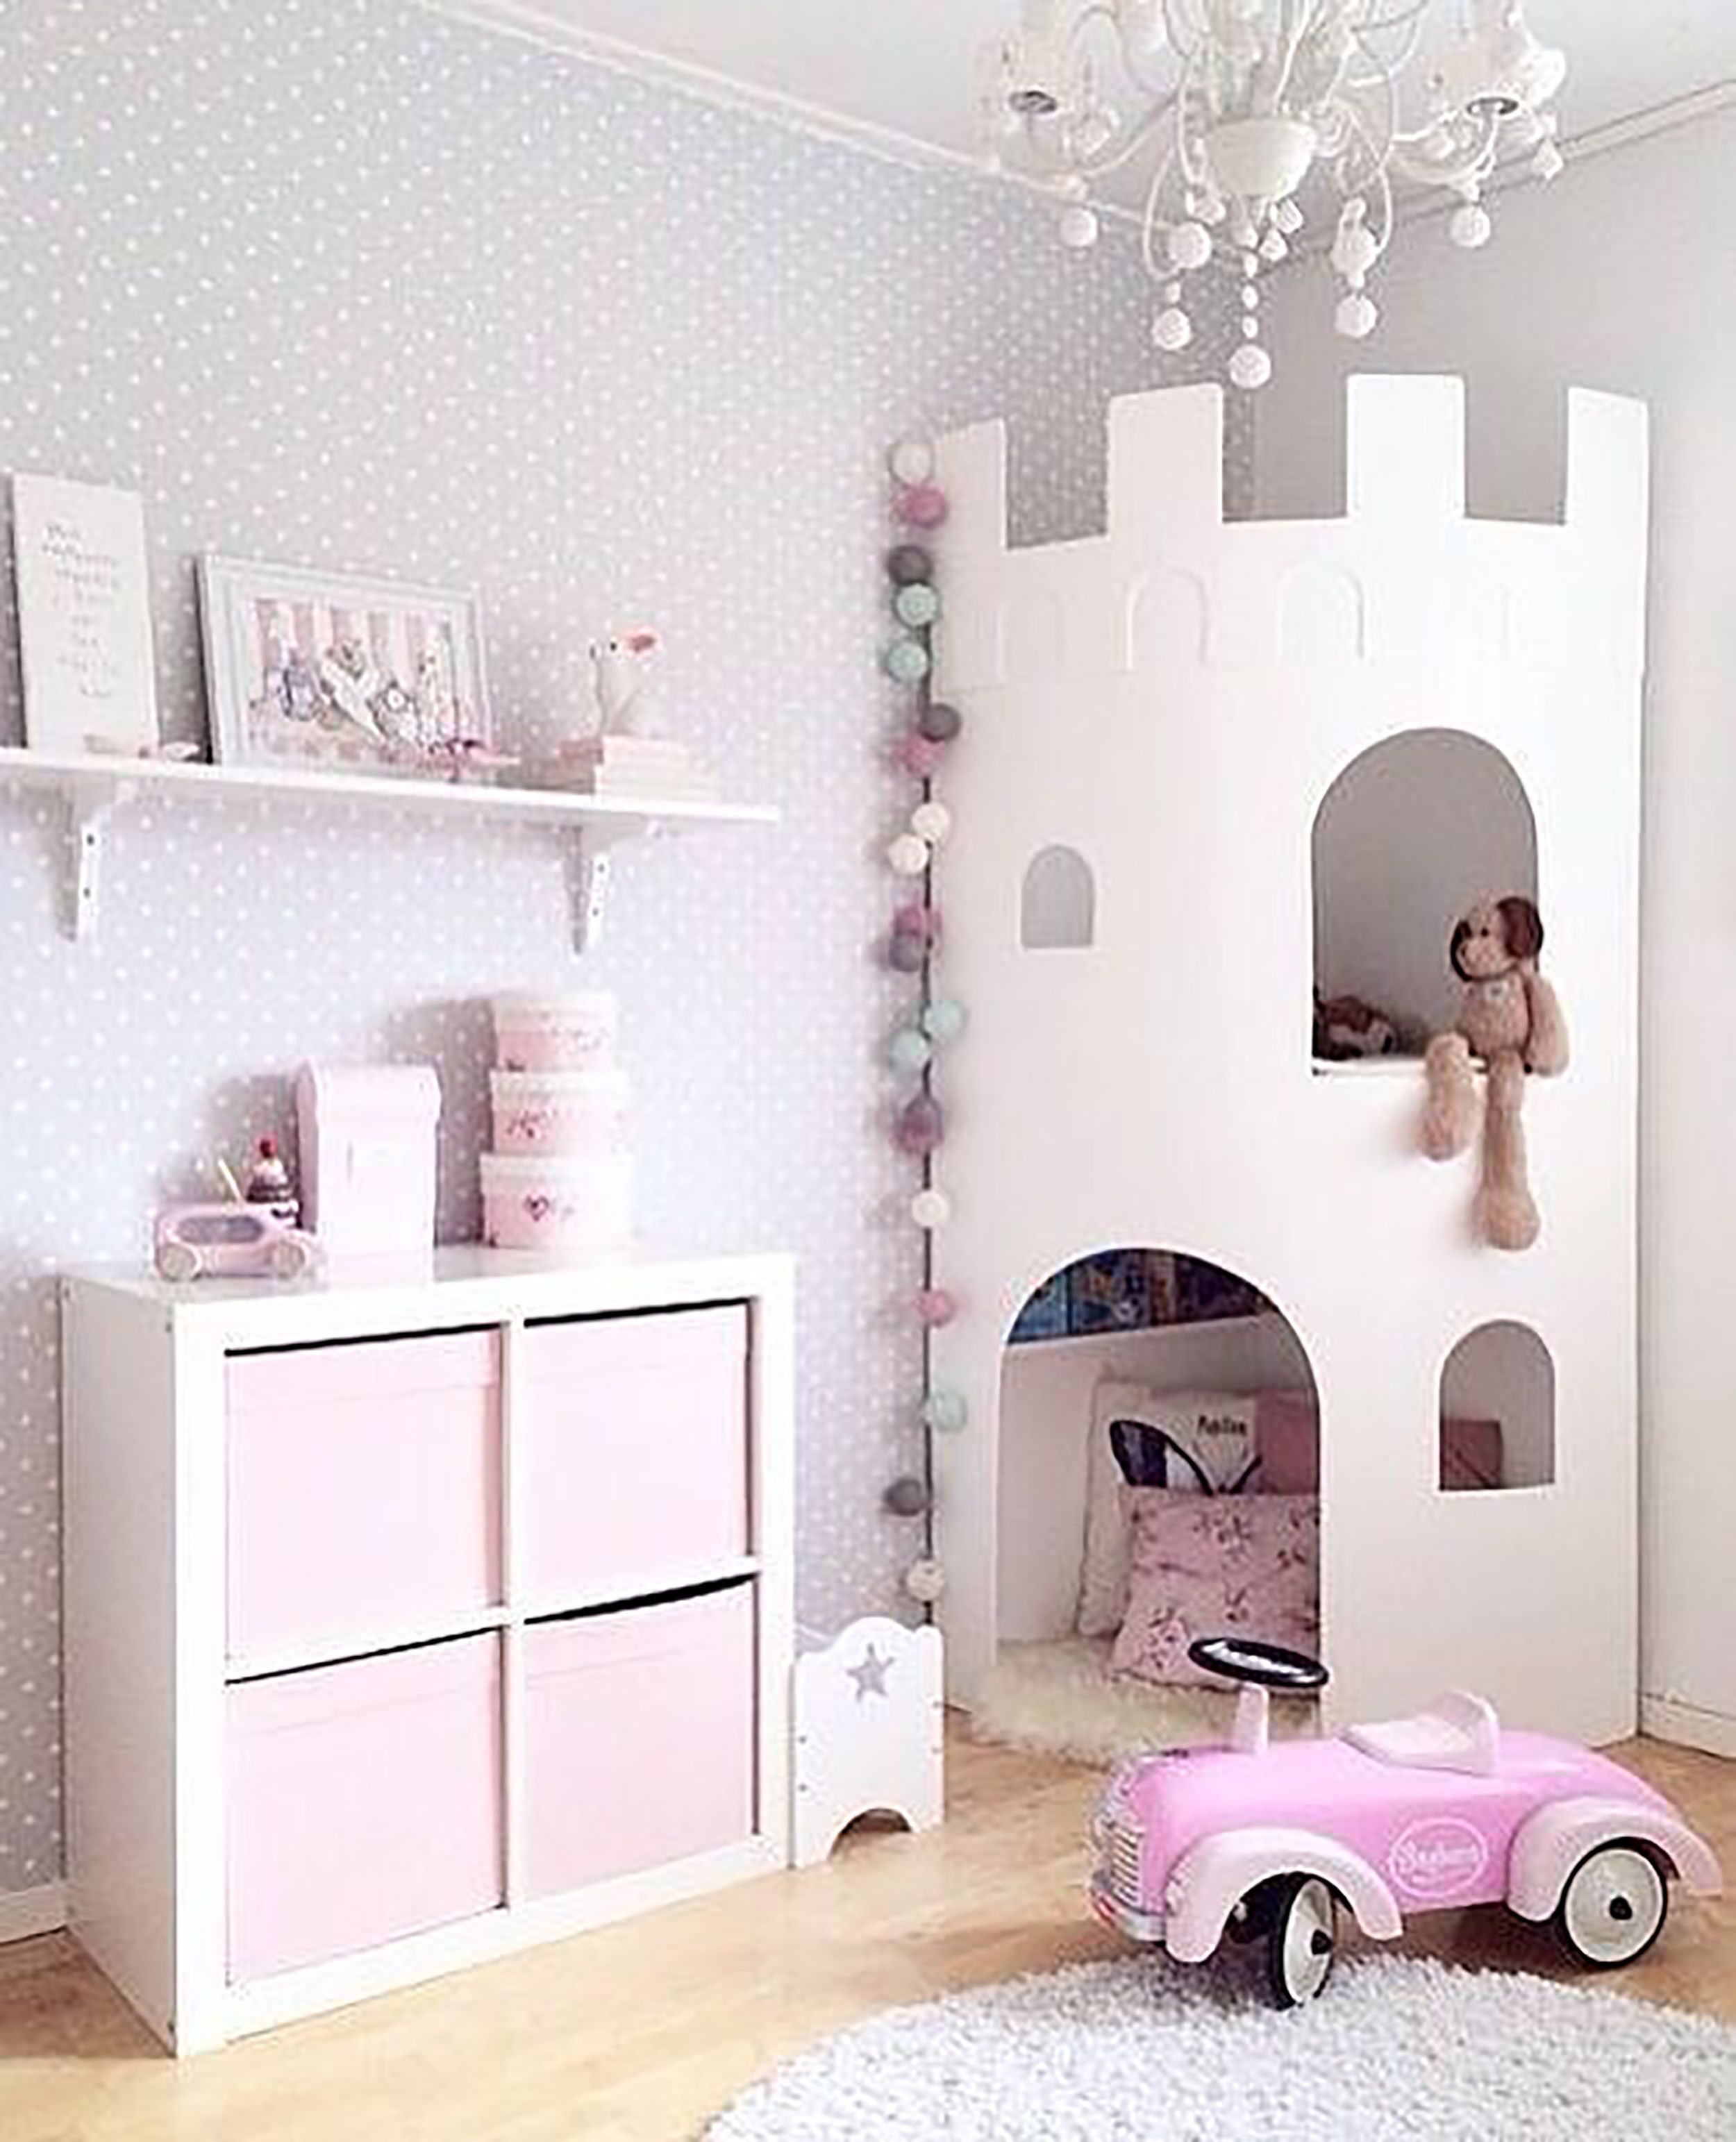 Our Kids Now Share a Room ...With Layout Challenges and a New Gender-Neutral Theme - Emily Henderson - Our Kids Now Share a Room ...With Layout Challenges and a New Gender-Neutral Theme - Emily Henderson -   19 diy Kids room ideas